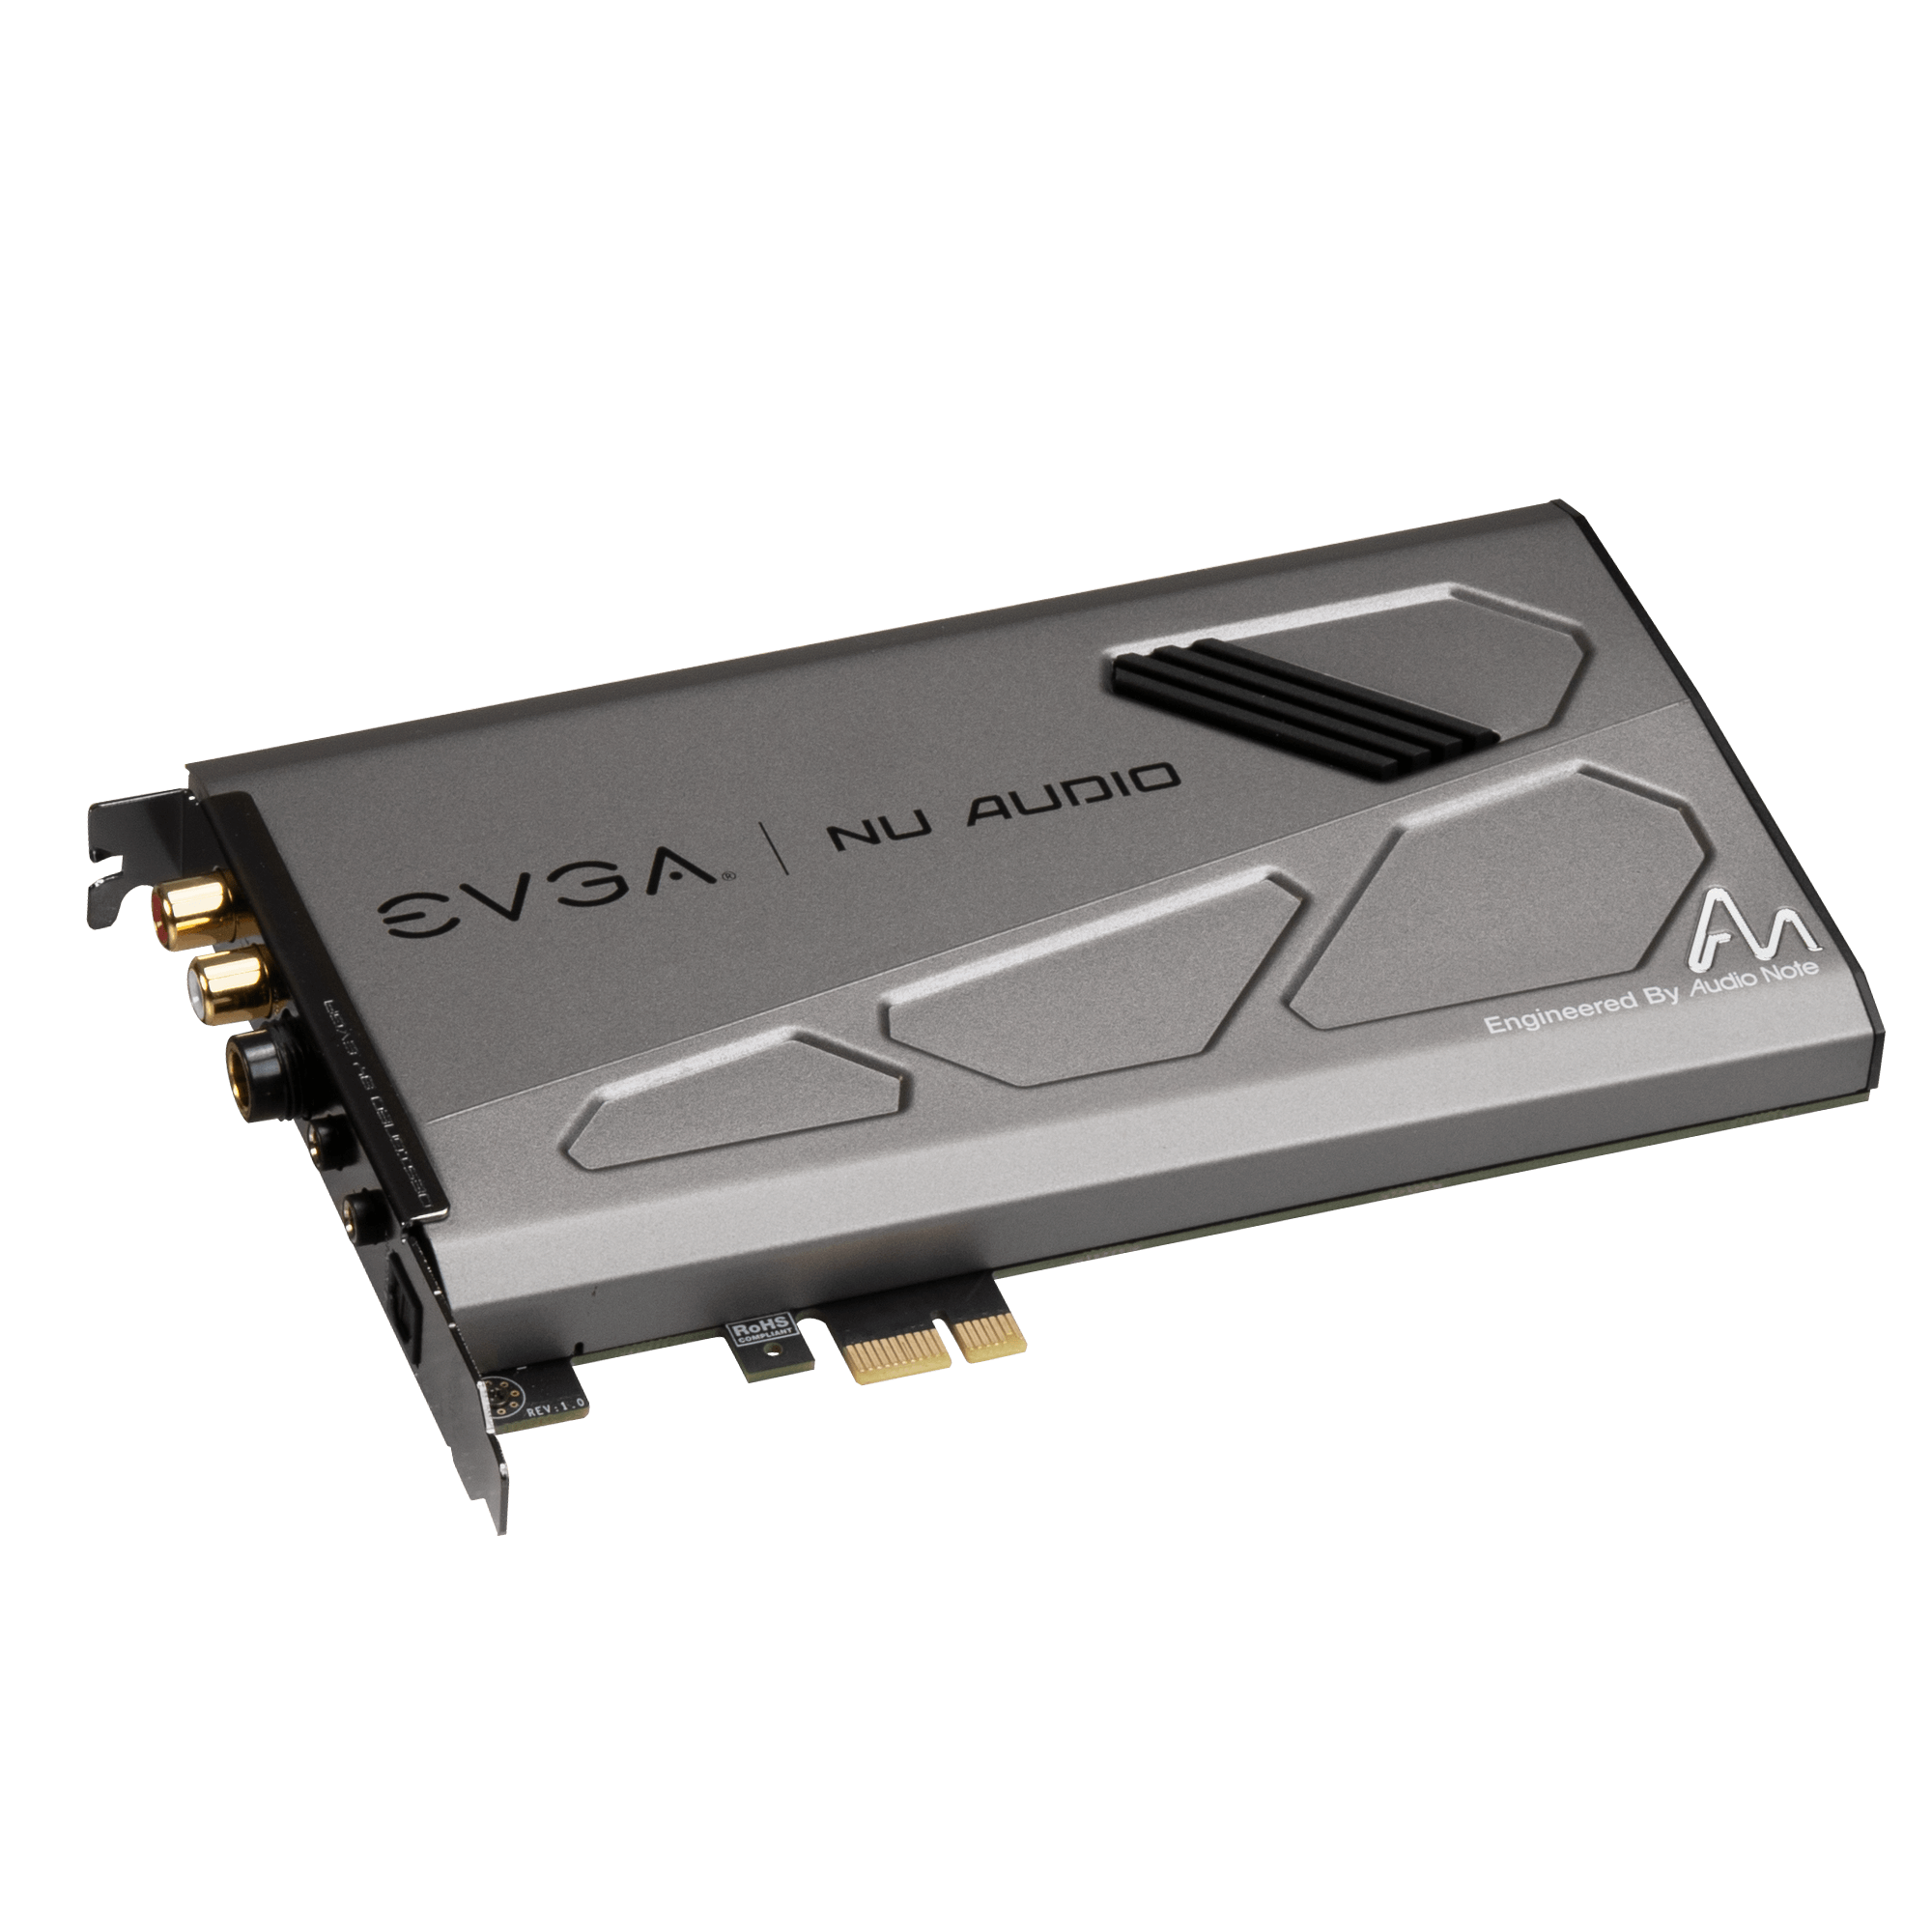 RGB LED EVGA Nu Audiokarte PCIe 712-P1-AN01-KR lebensechte Audio Uk CO-Engineered by and Audio Note 